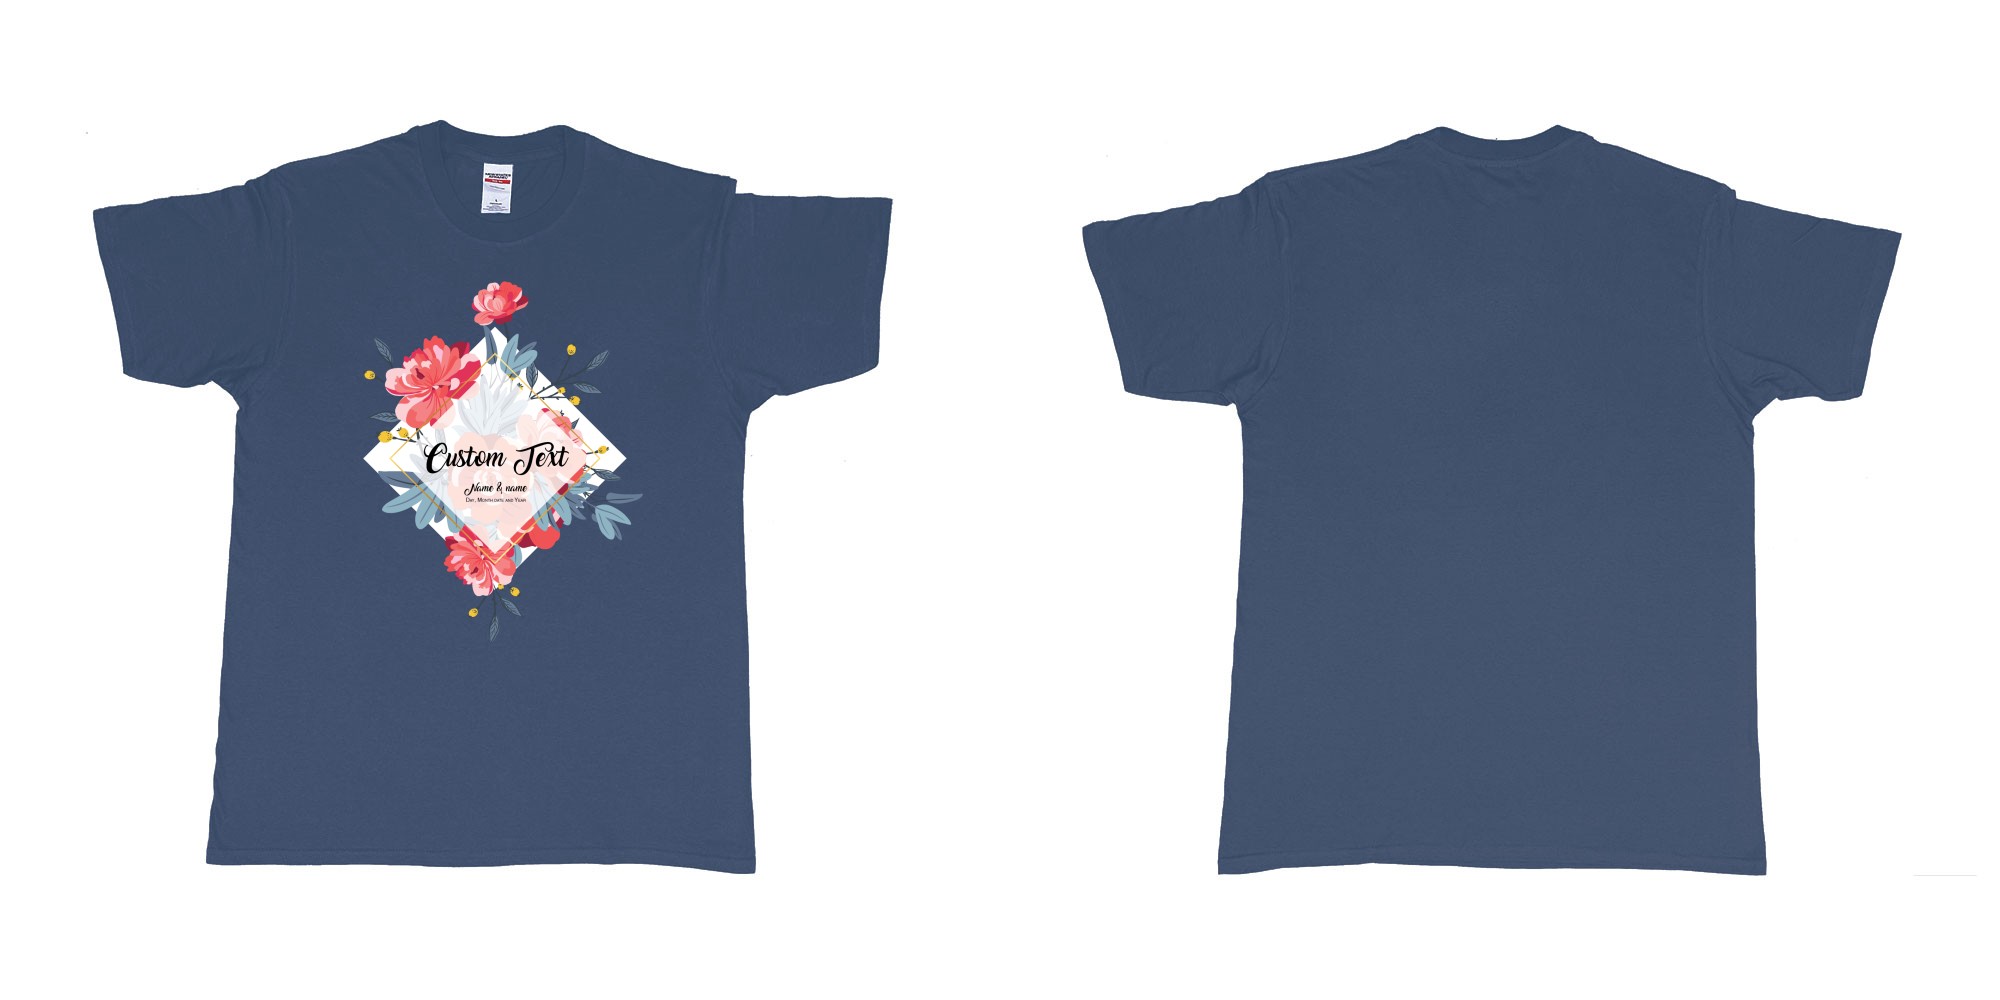 Custom tshirt design flower bouquet custom text in fabric color navy choice your own text made in Bali by The Pirate Way